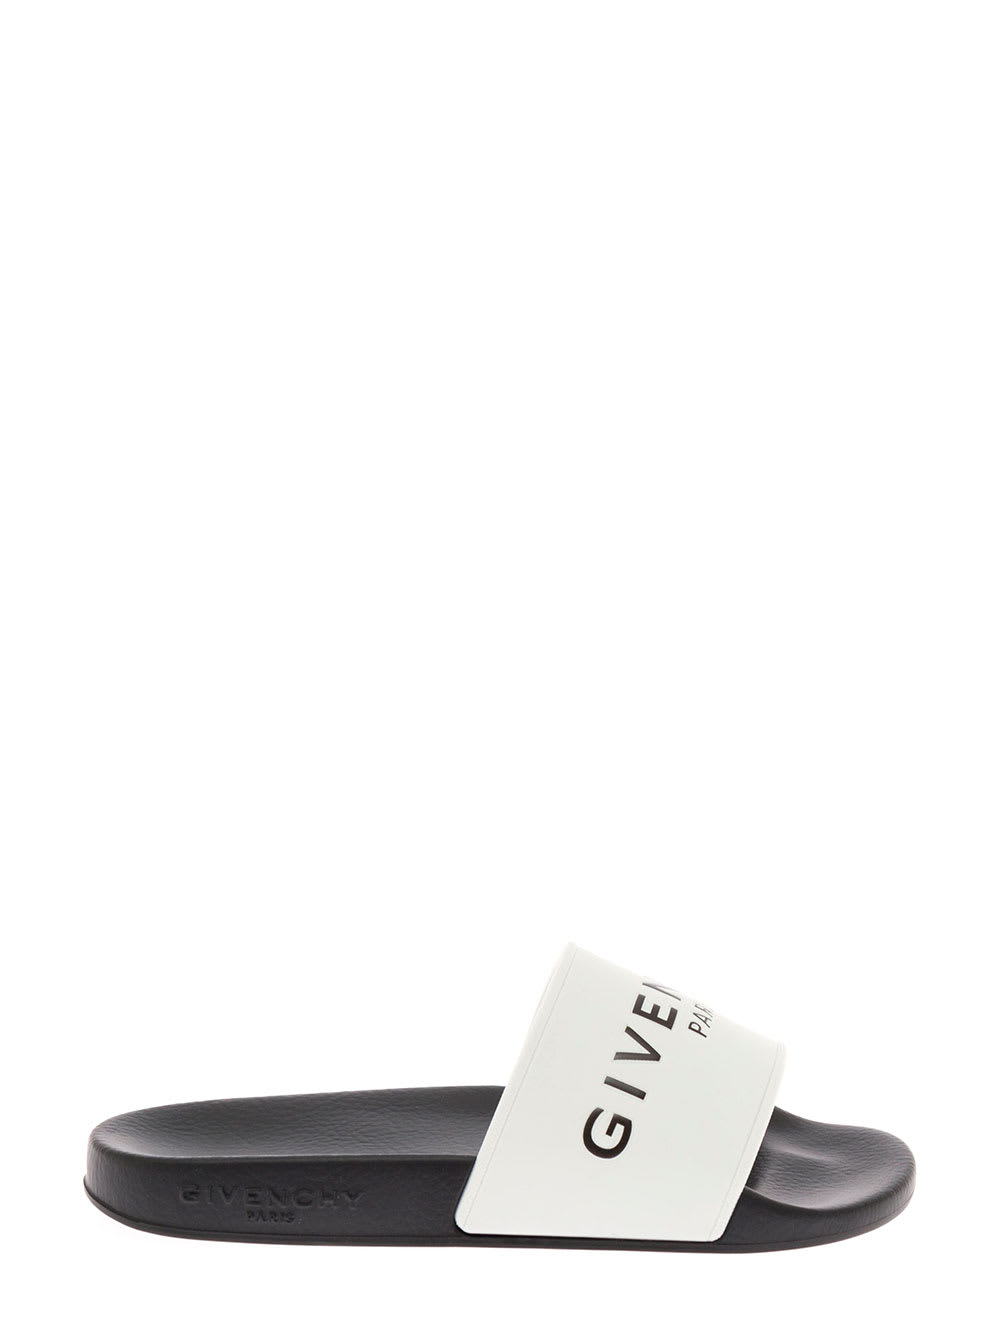 Black And White Slide Rubber Sandals With Logo Givenchy Kids Boy